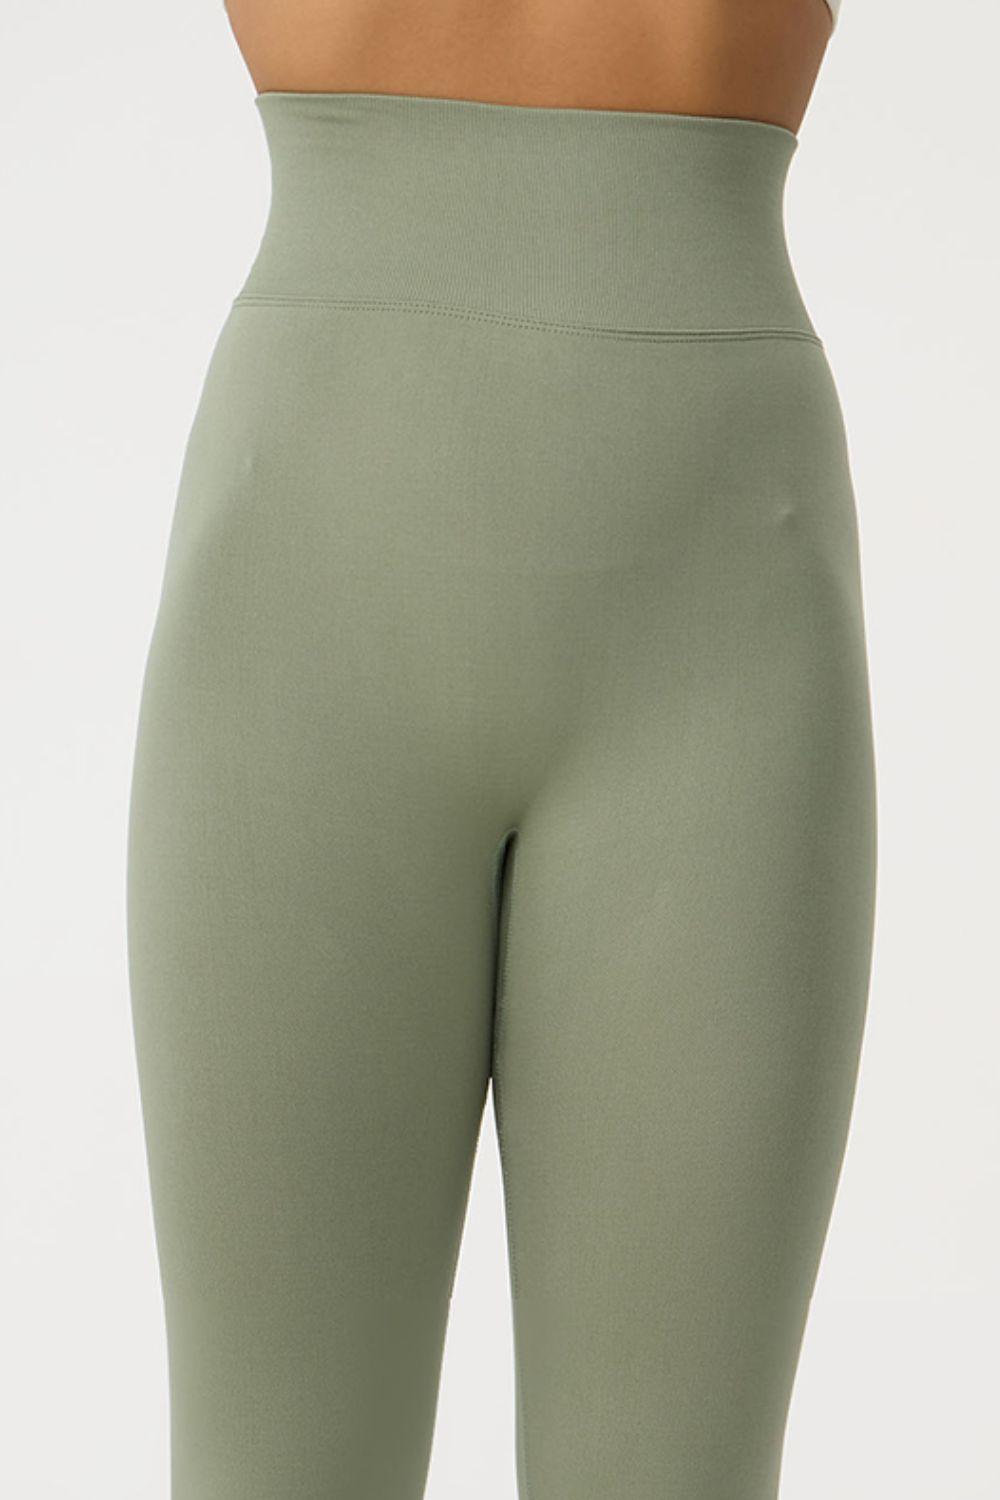 a close up of a woman's butt in a green leggings